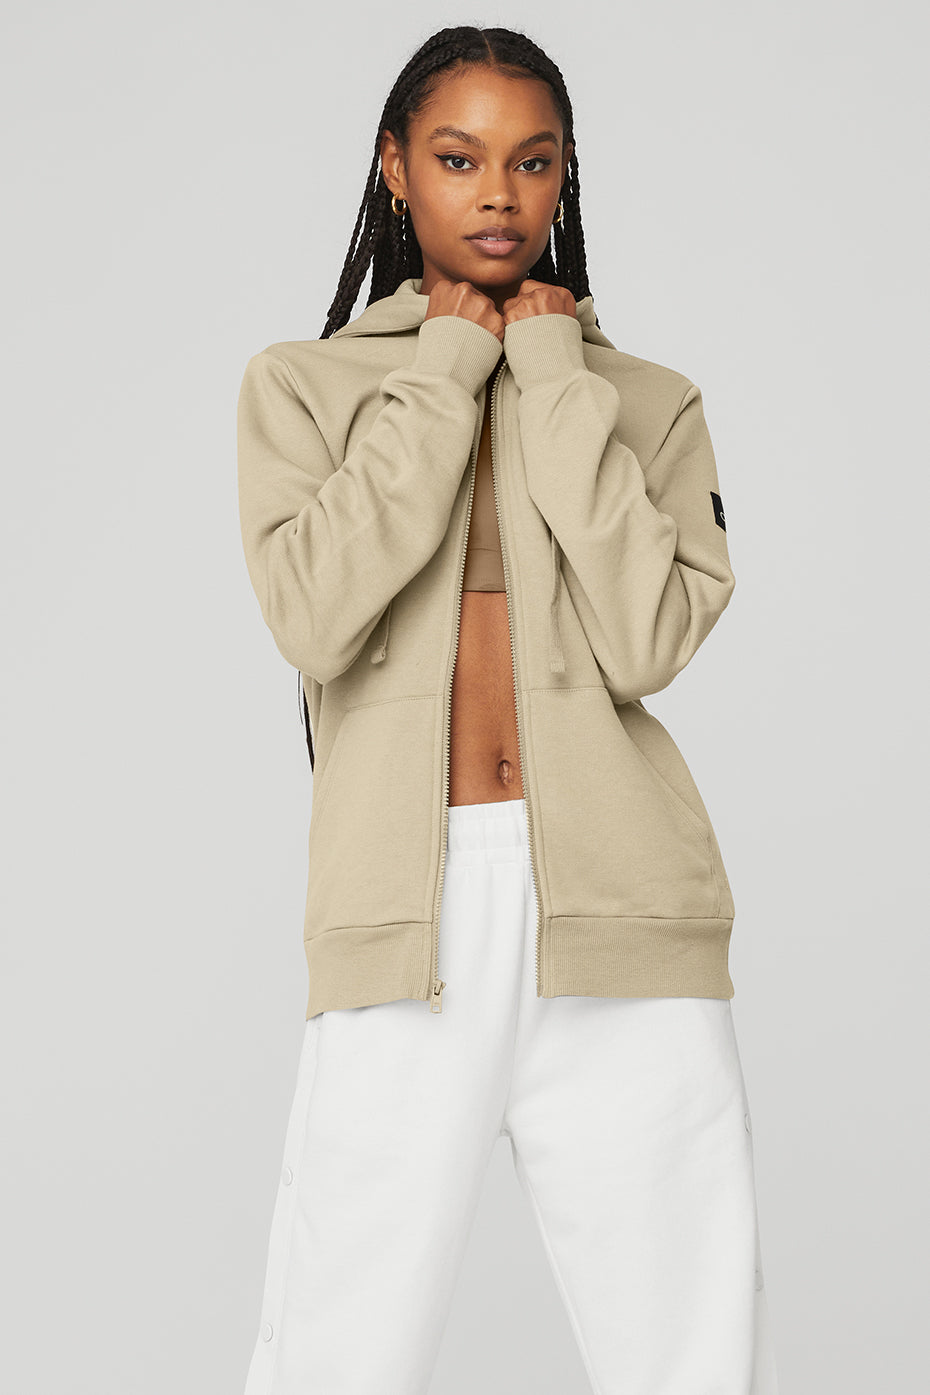 Faux Leather Gold Rush Puffer Jacket in California Sand by Alo